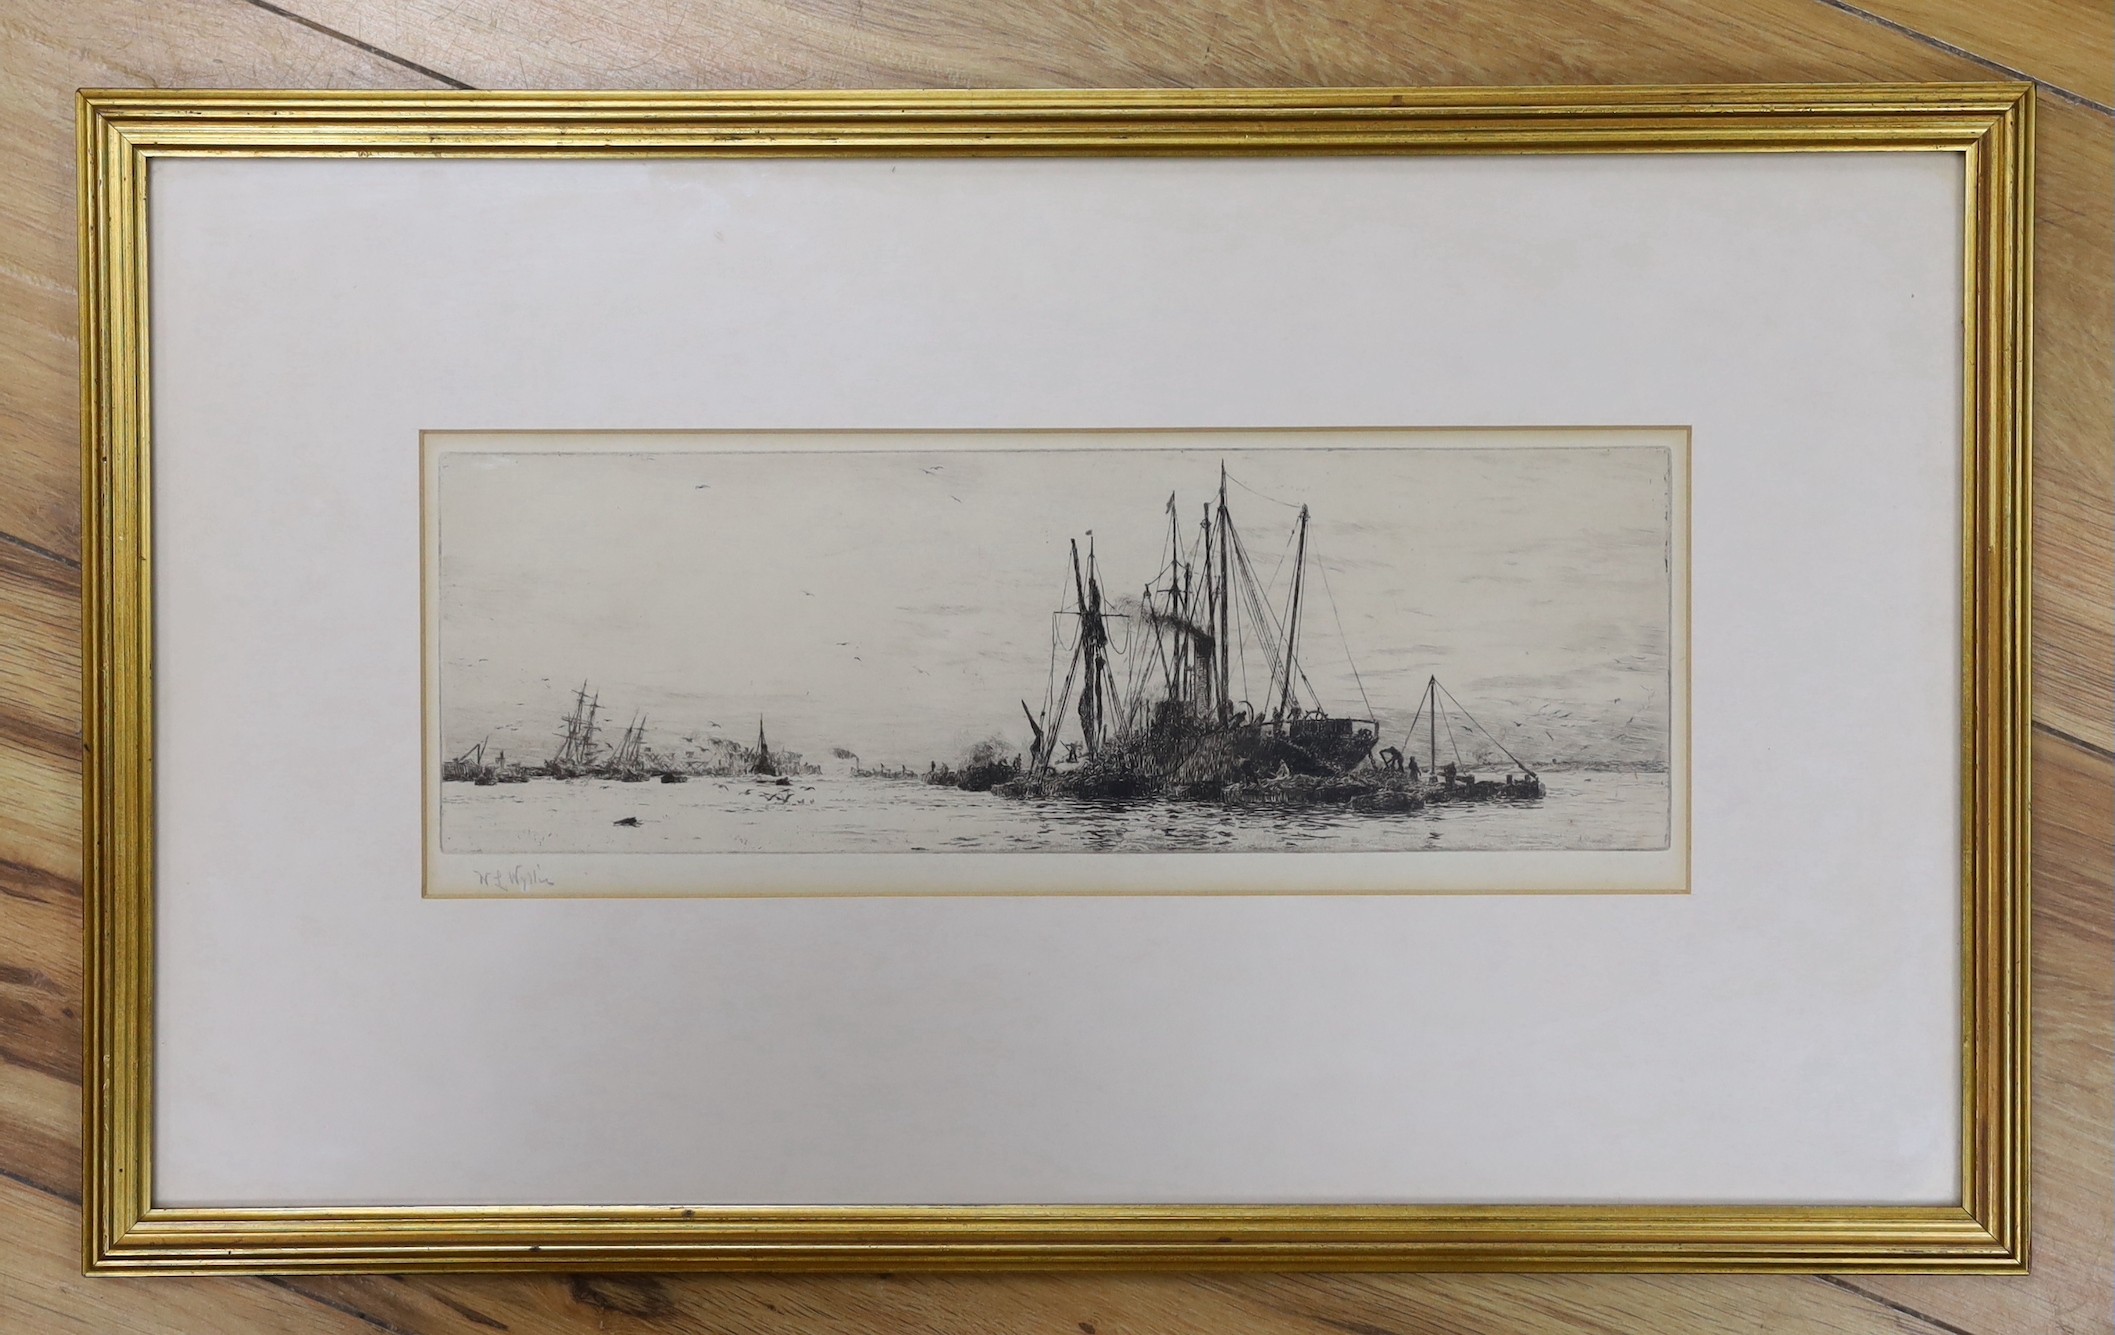 William Lionel Wyllie (1851-1931), drypoint etching, 'Unloading timber', signed in pencil, 11 x 33cm